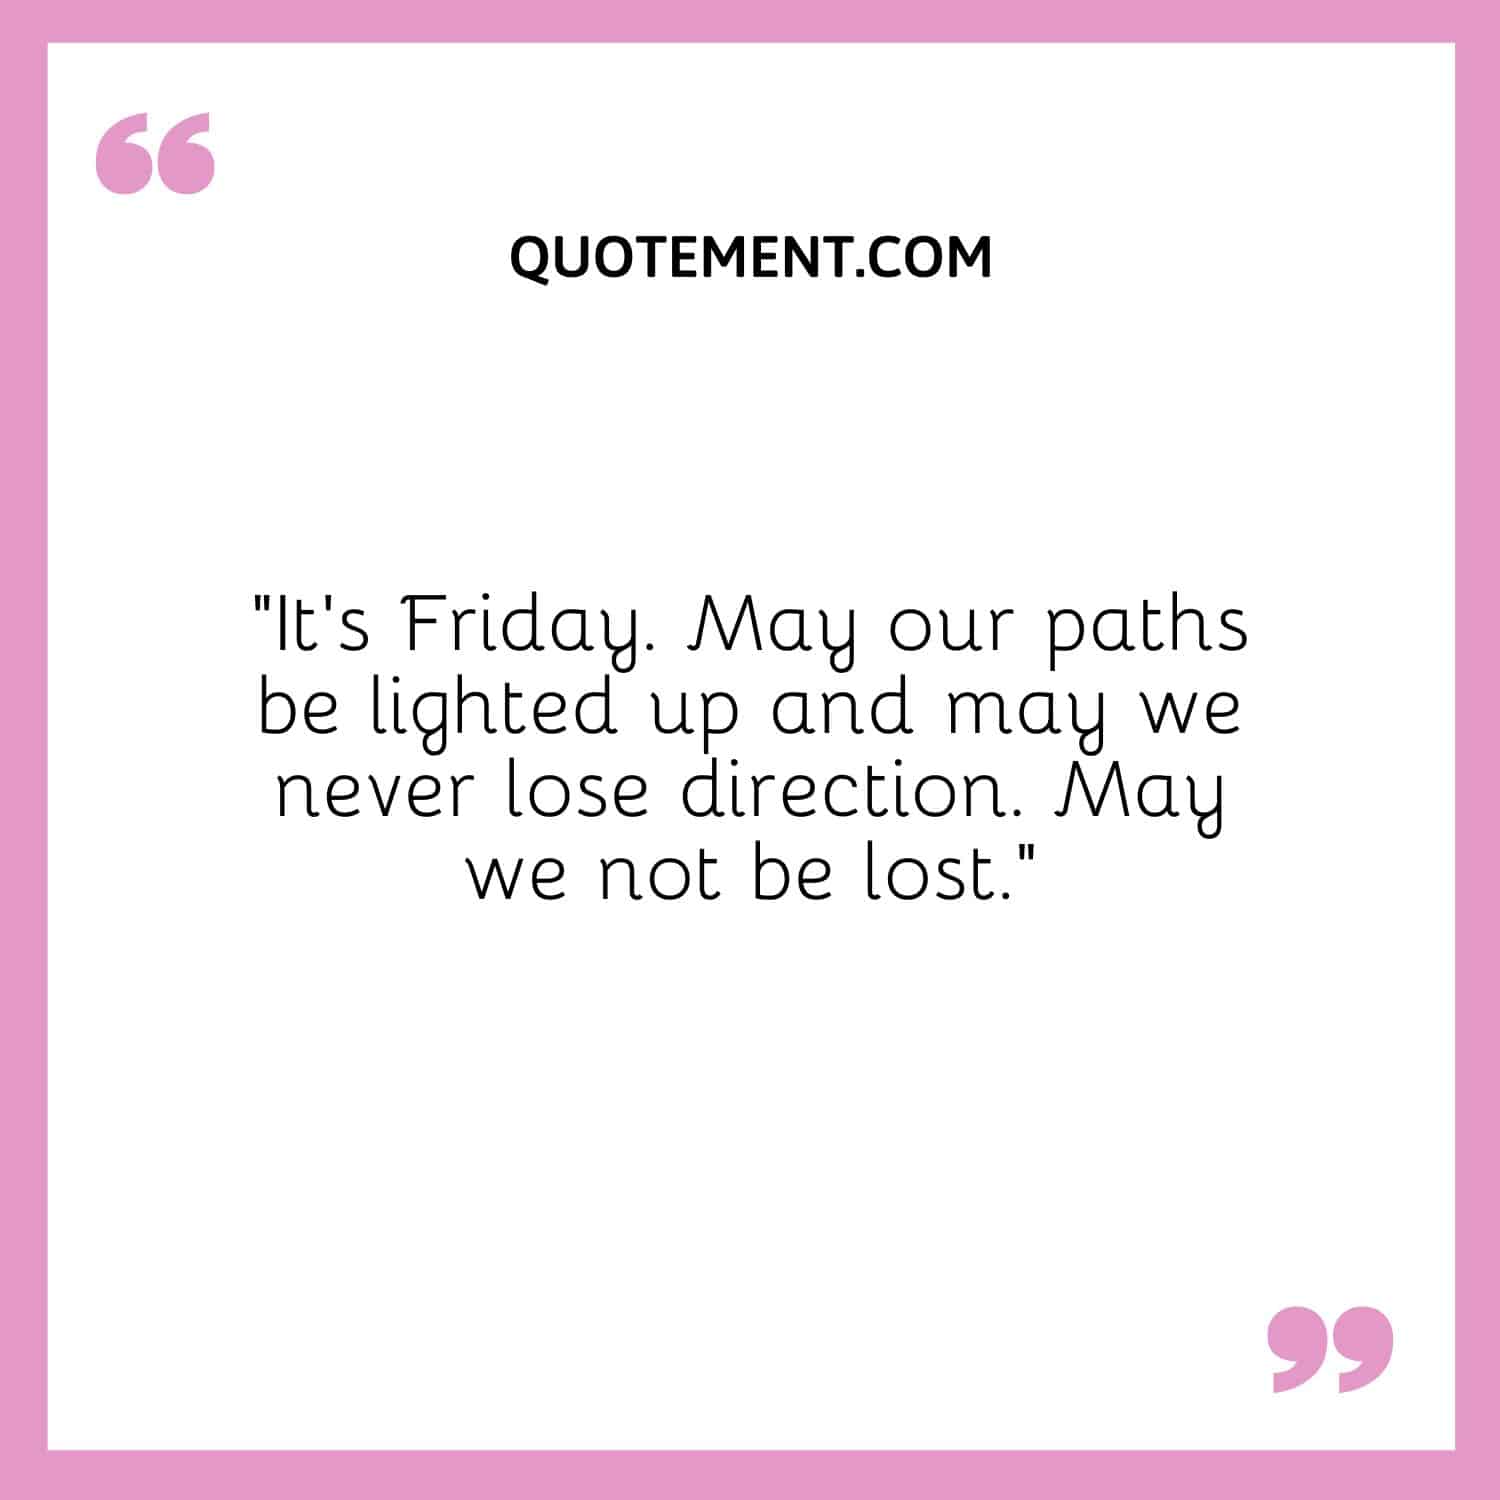 May our paths be lighted up and may we never lose direction